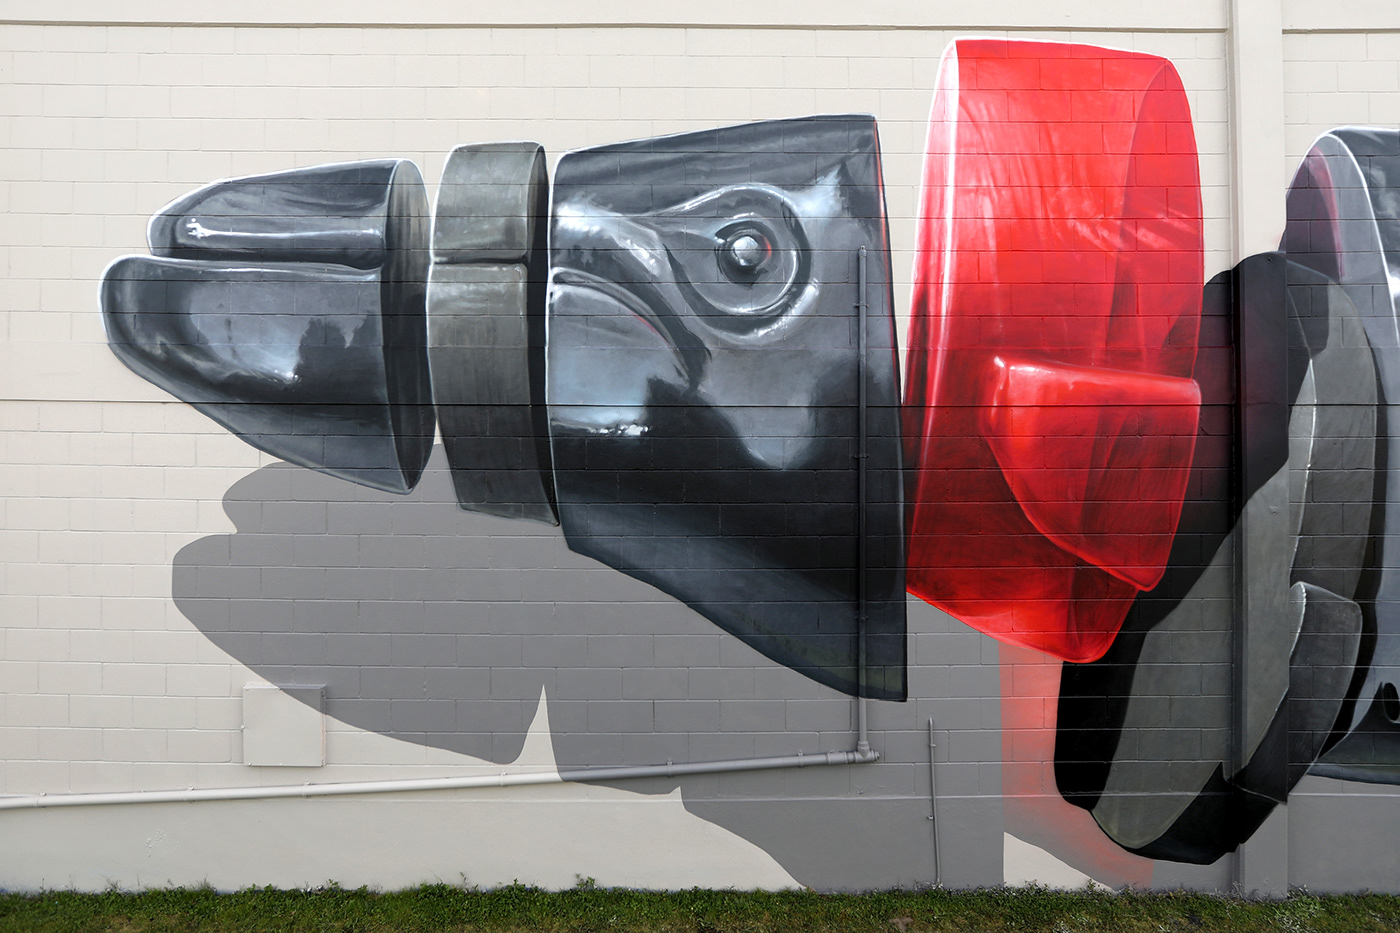 Whale New Zealand Gisborne material Mural painting   pieces streetart